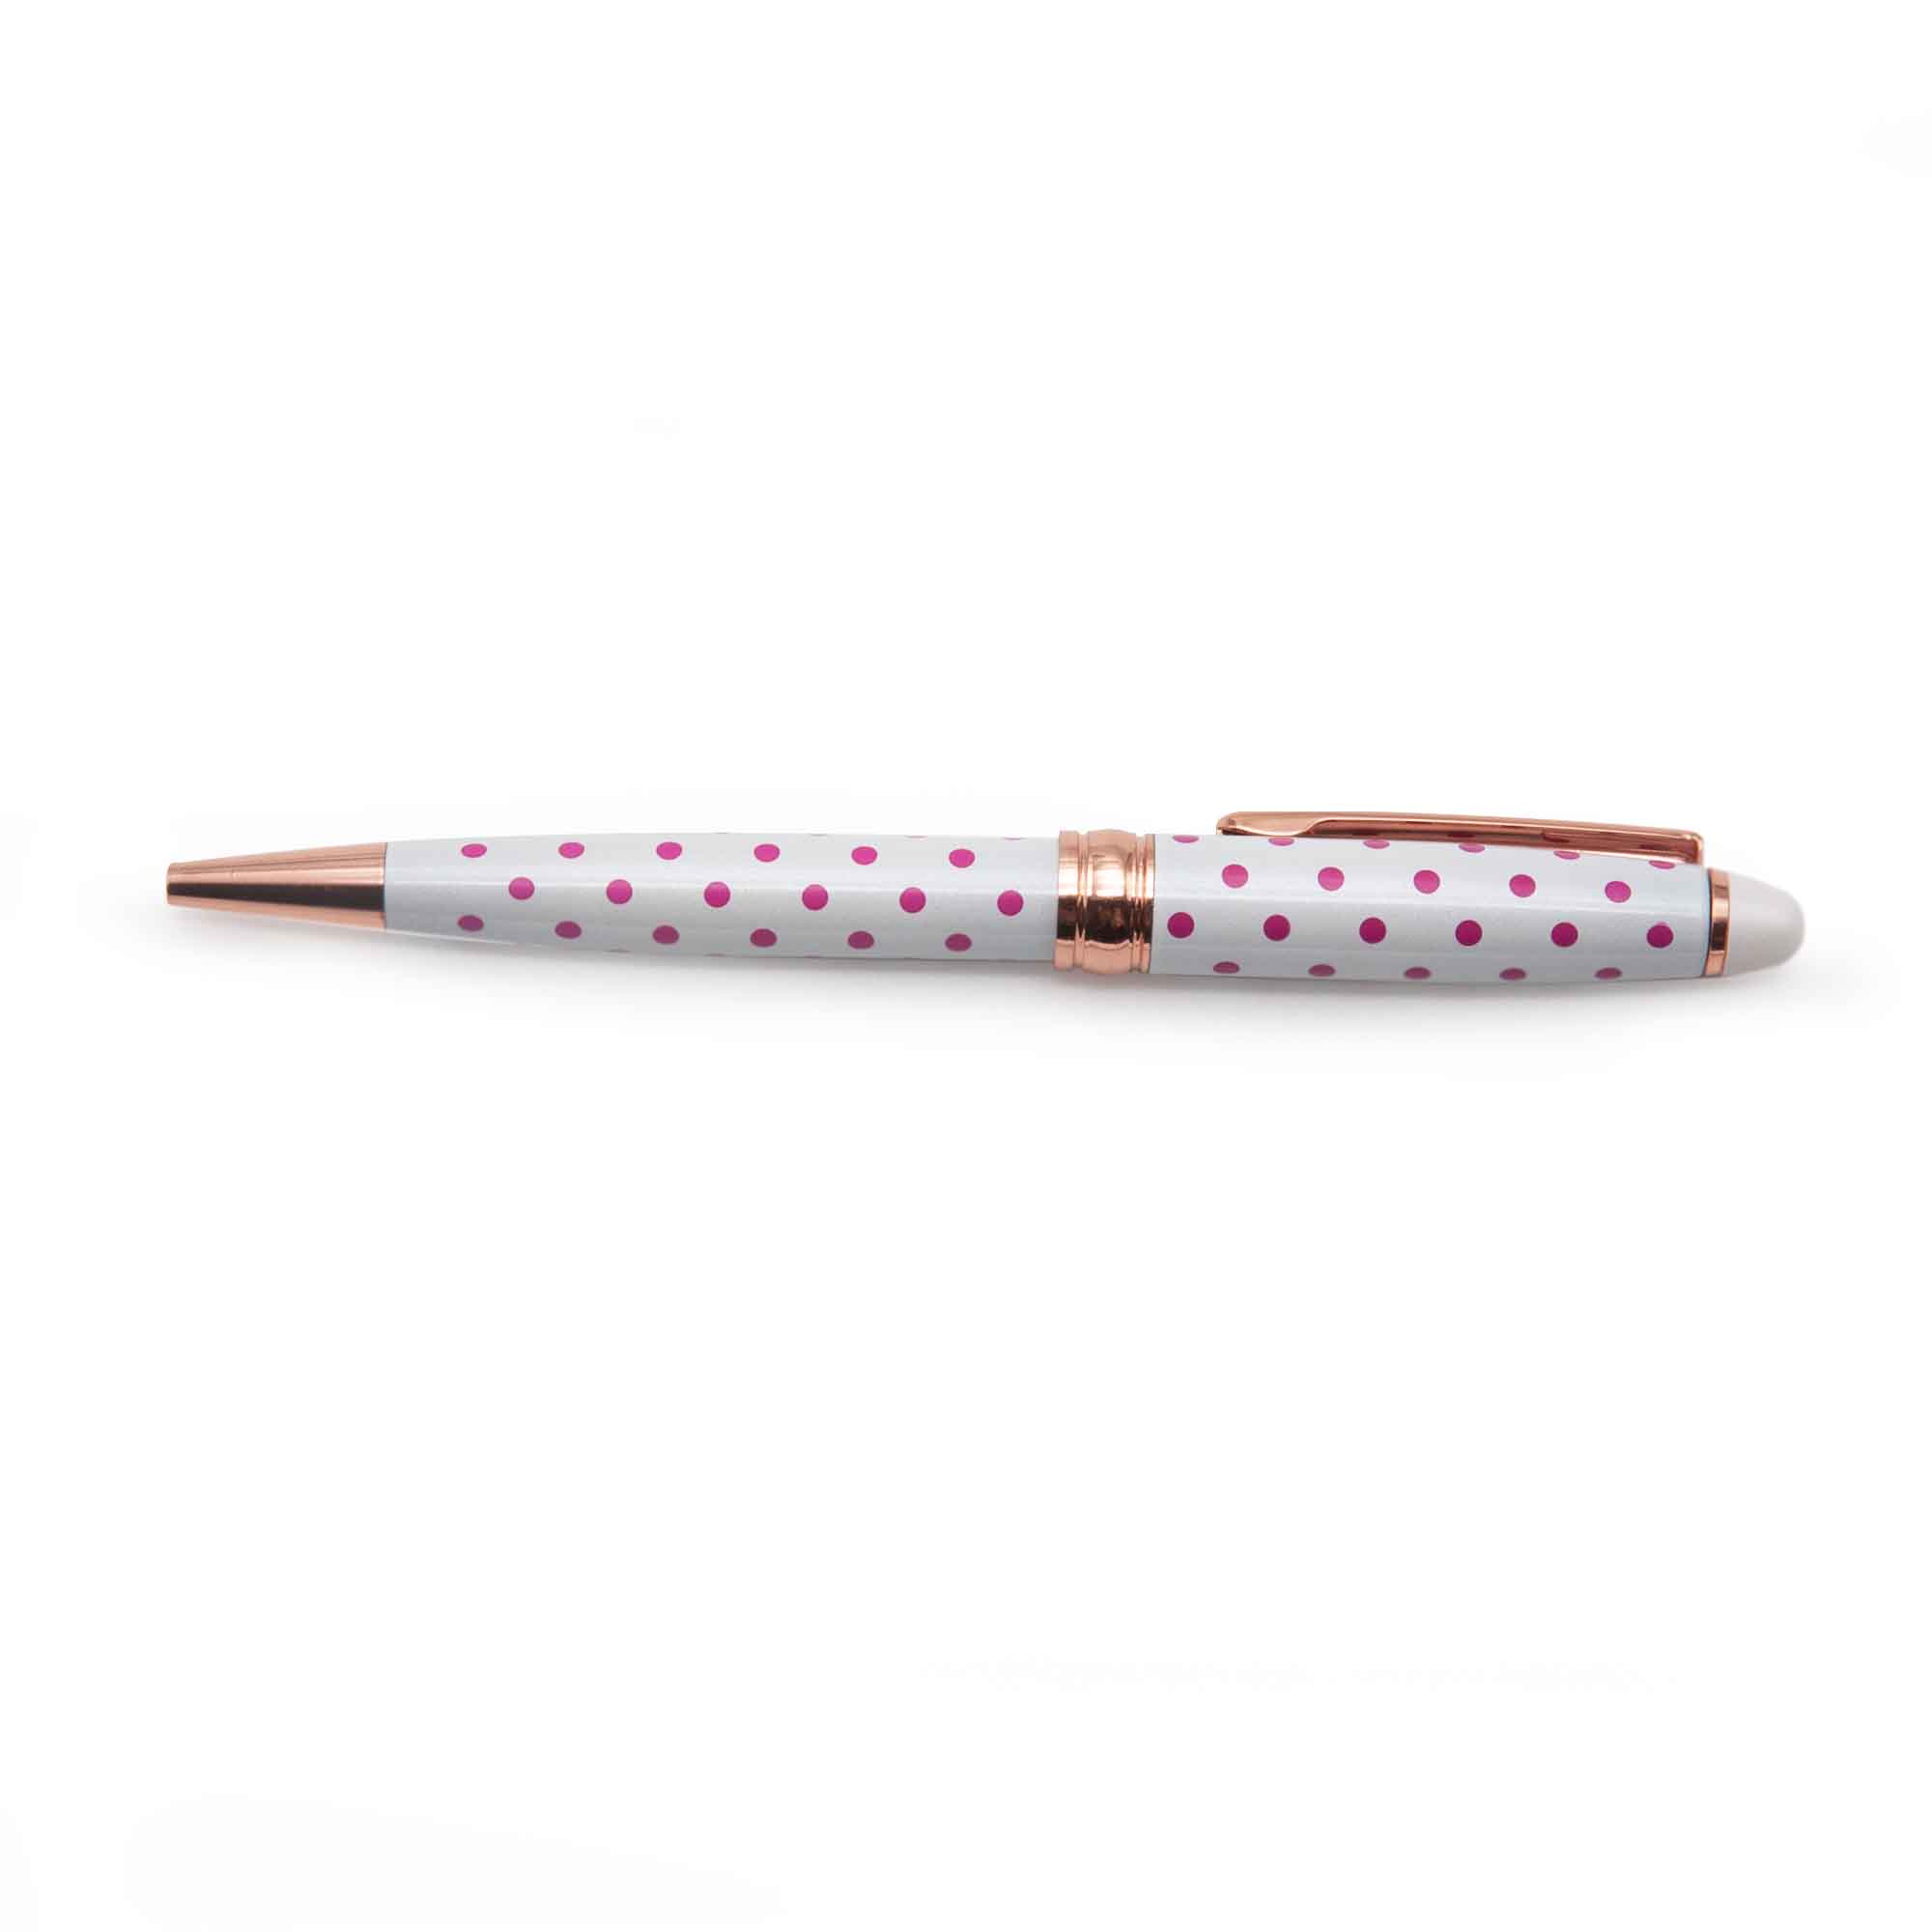 Image shows a white ballpoint pen with pink polka dots 